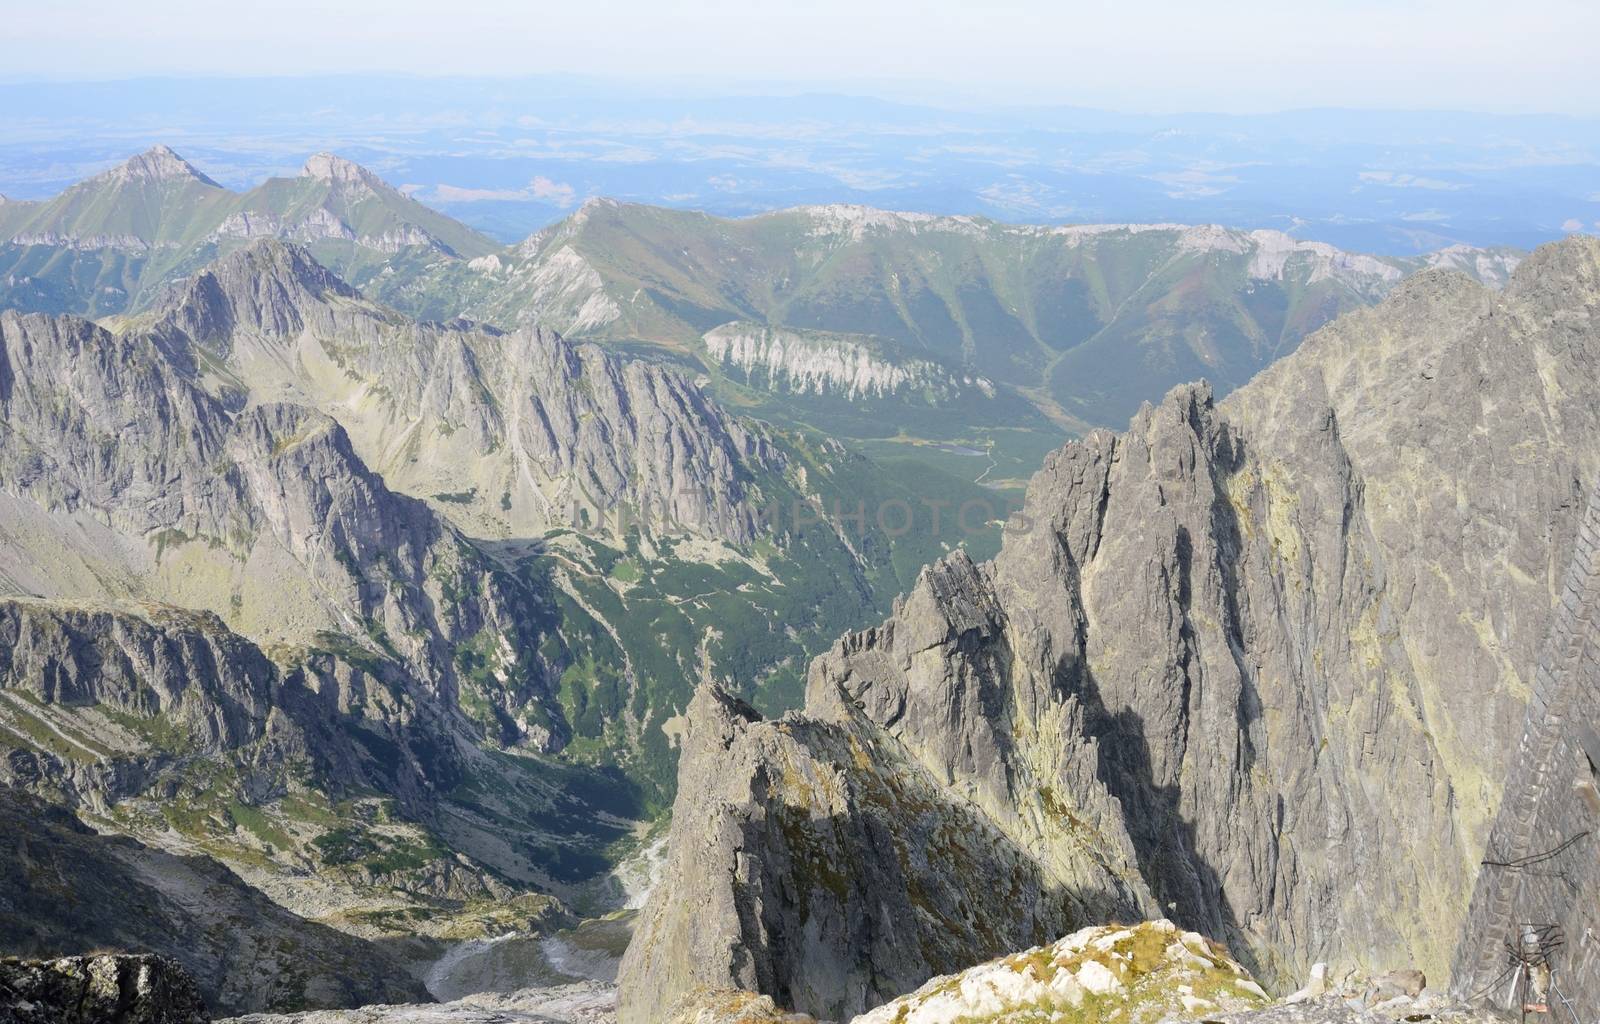 View of tatra mountains from peak of Lomnicky stit by pauws99